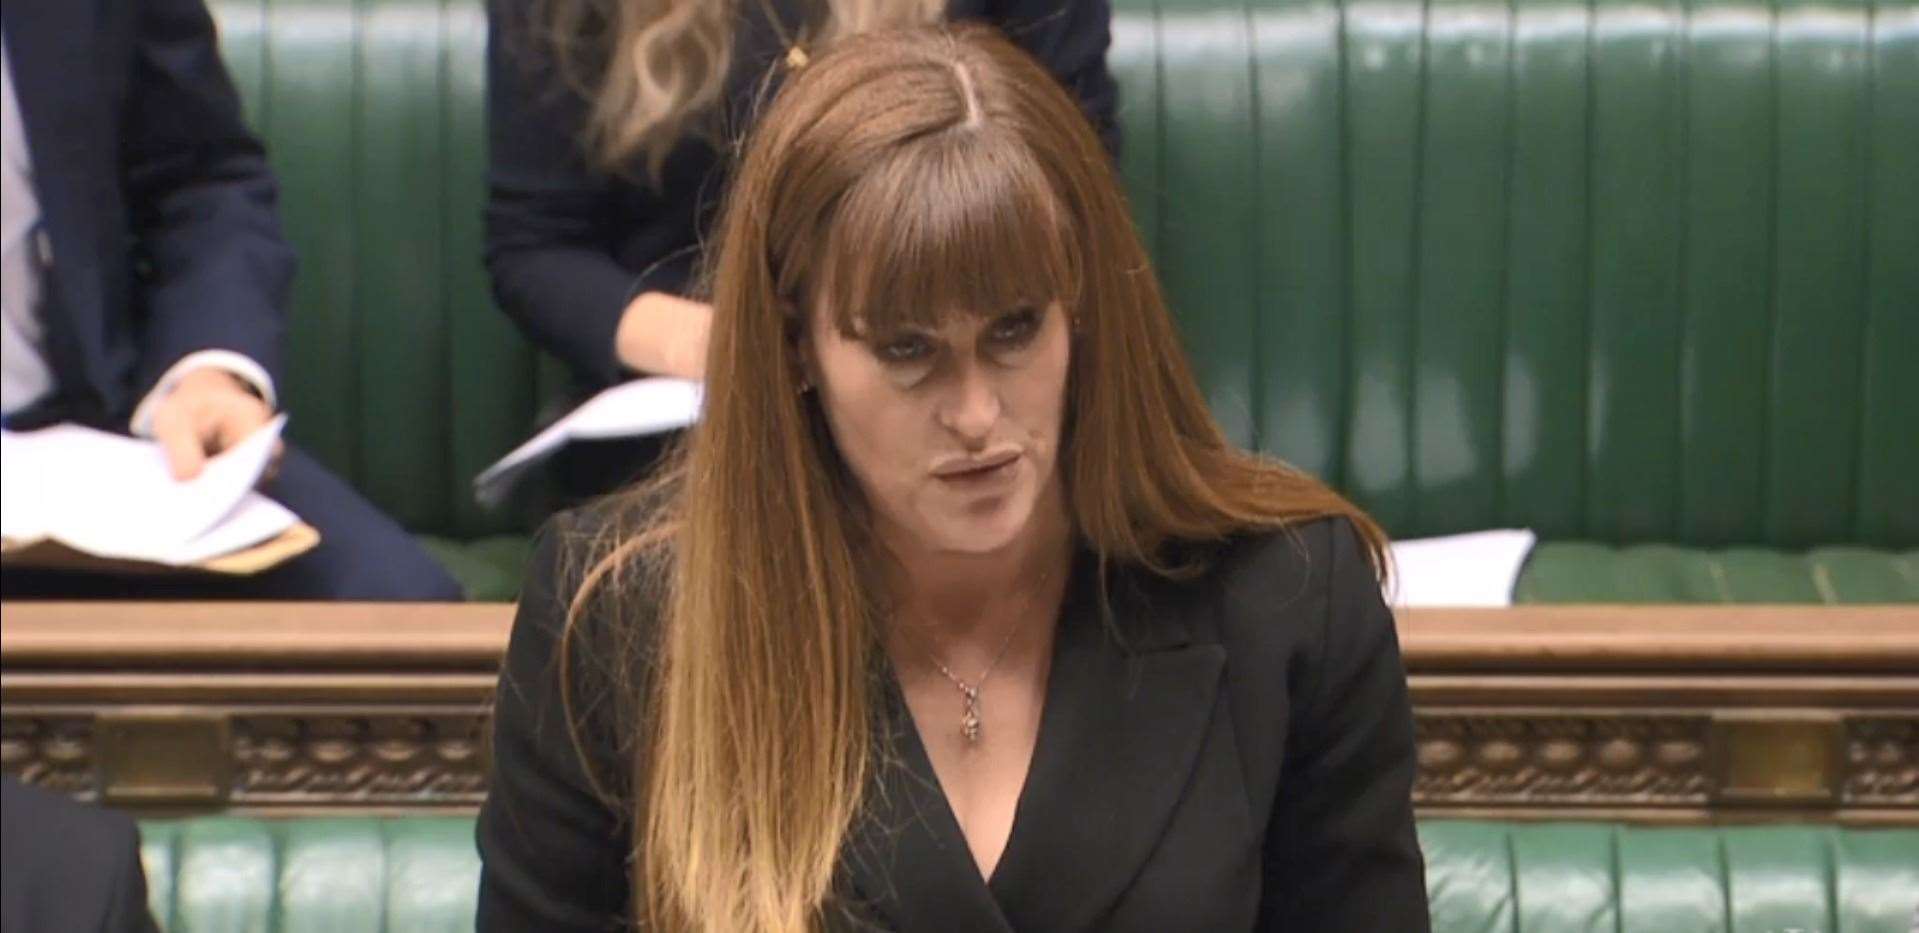 Kelly Tolhurst voted against the Fire Safety Bill amendments